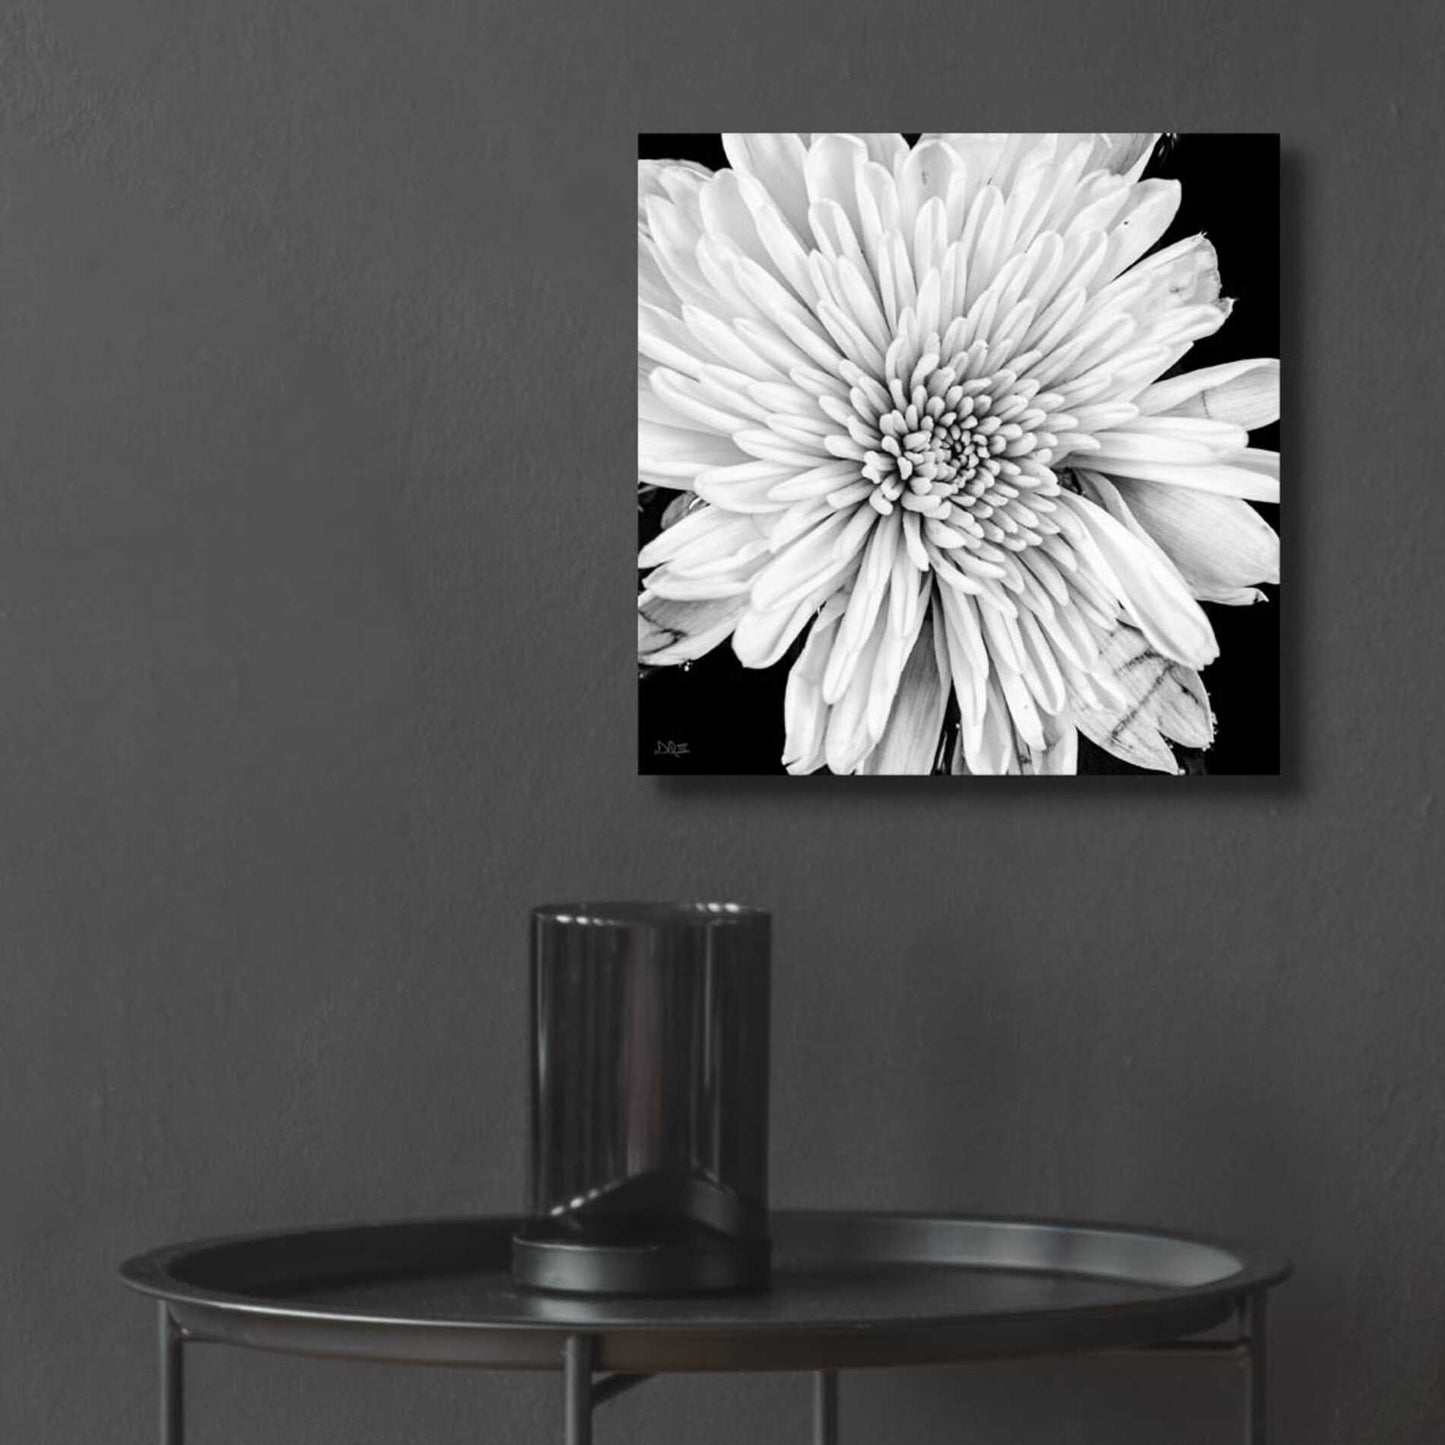 Epic Art 'Black and White Love II' by Donnie Quillen, Acrylic Glass Wall Art,12x12